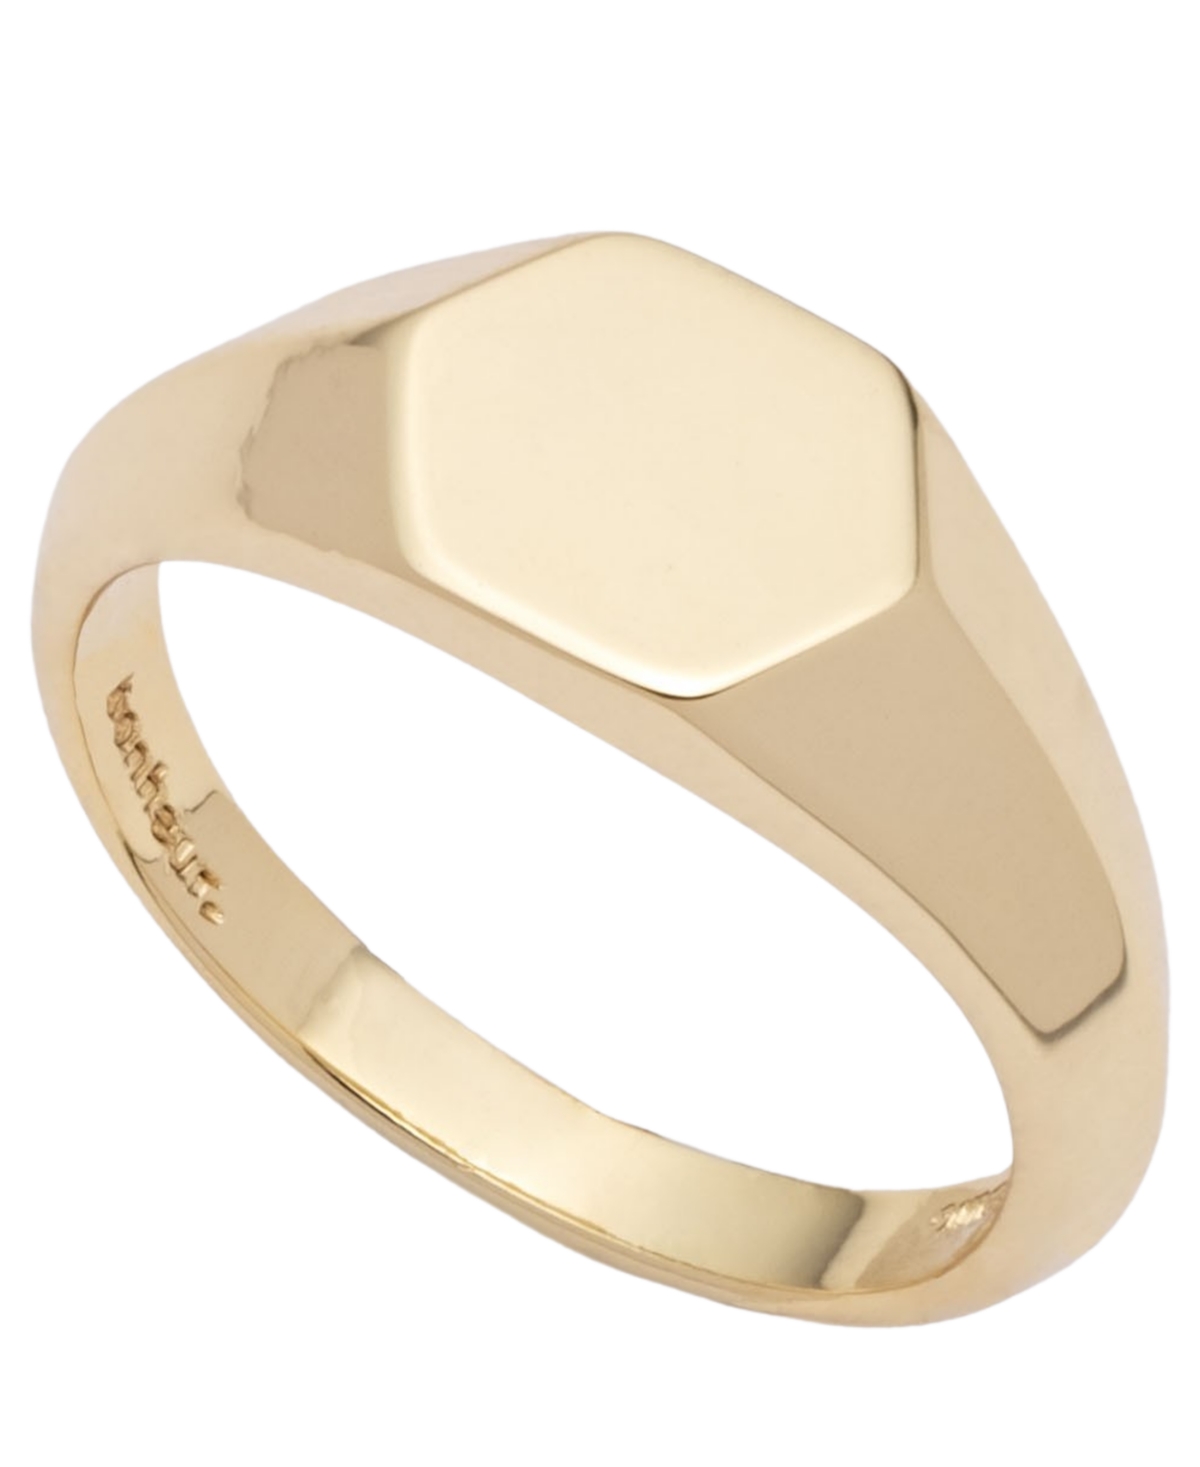 Bonheur Jewelry Mabel Bespoke Signet Ring In Karat Micro Plated Gold Over Brass